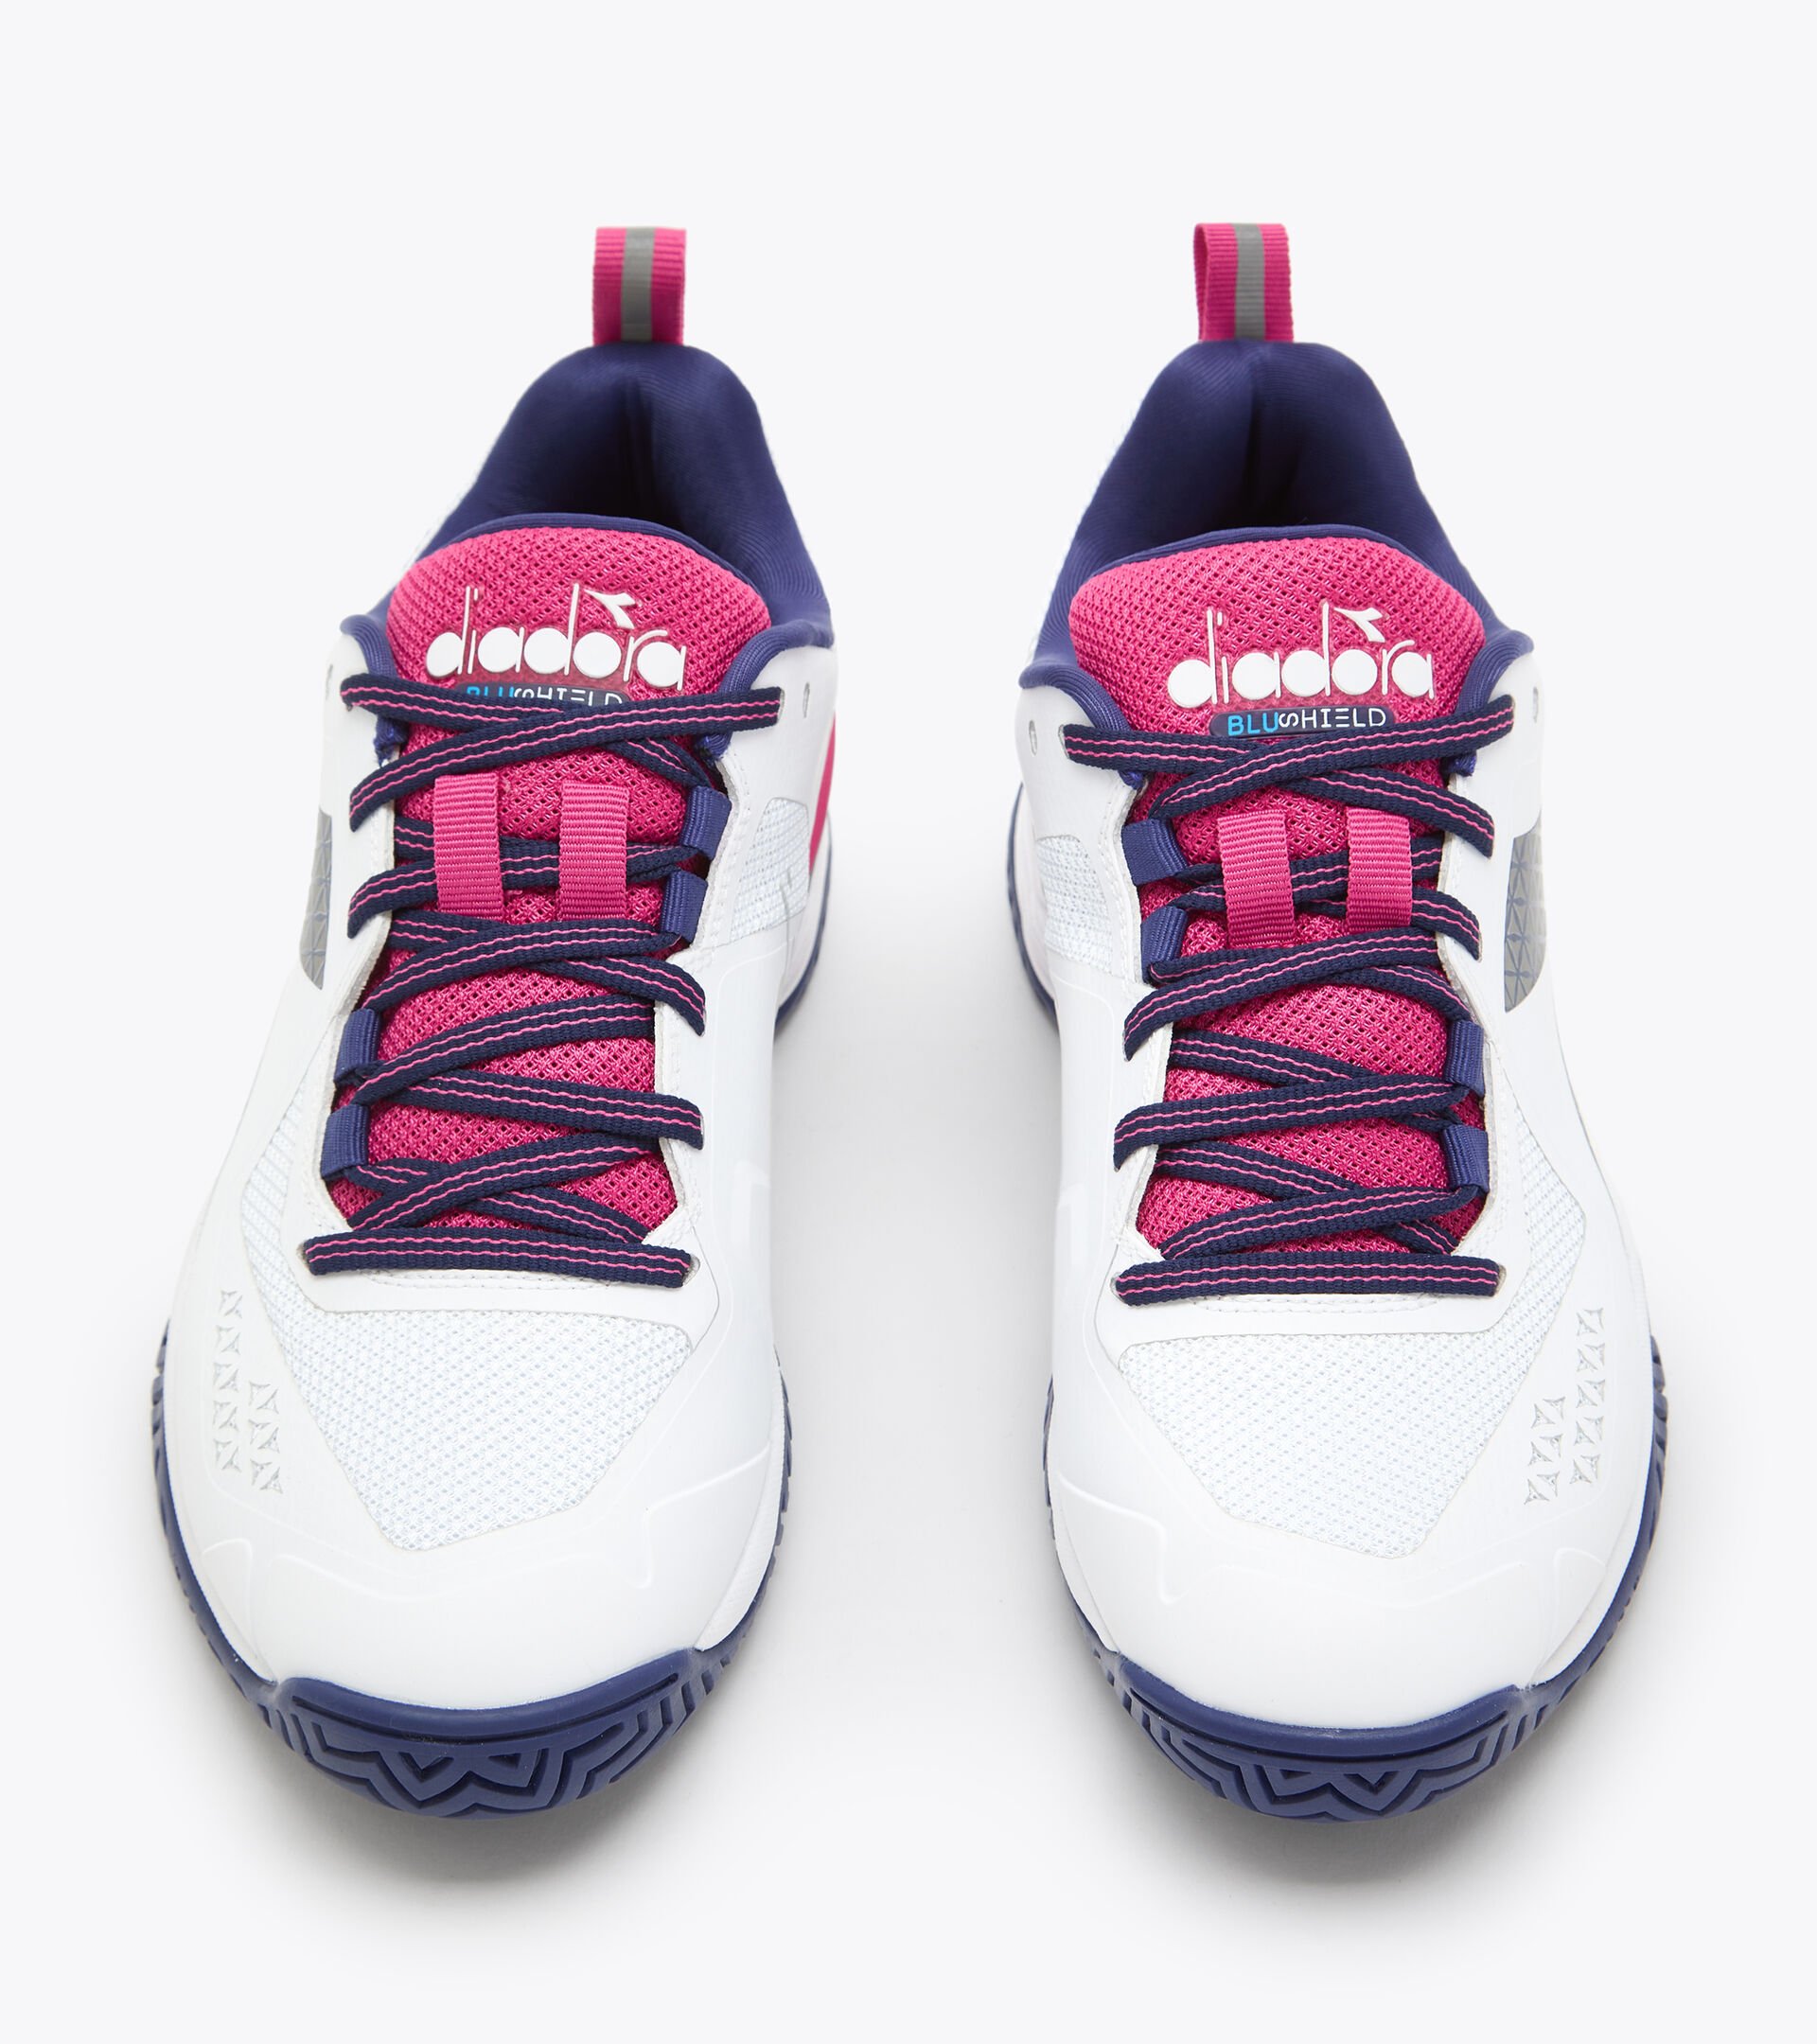 Tennis shoes for hard surfaces or clay courts - Women BLUSHIELD TORNEO 2 W AG WHITE/BLUEPRINT/PINK YARROW - Diadora